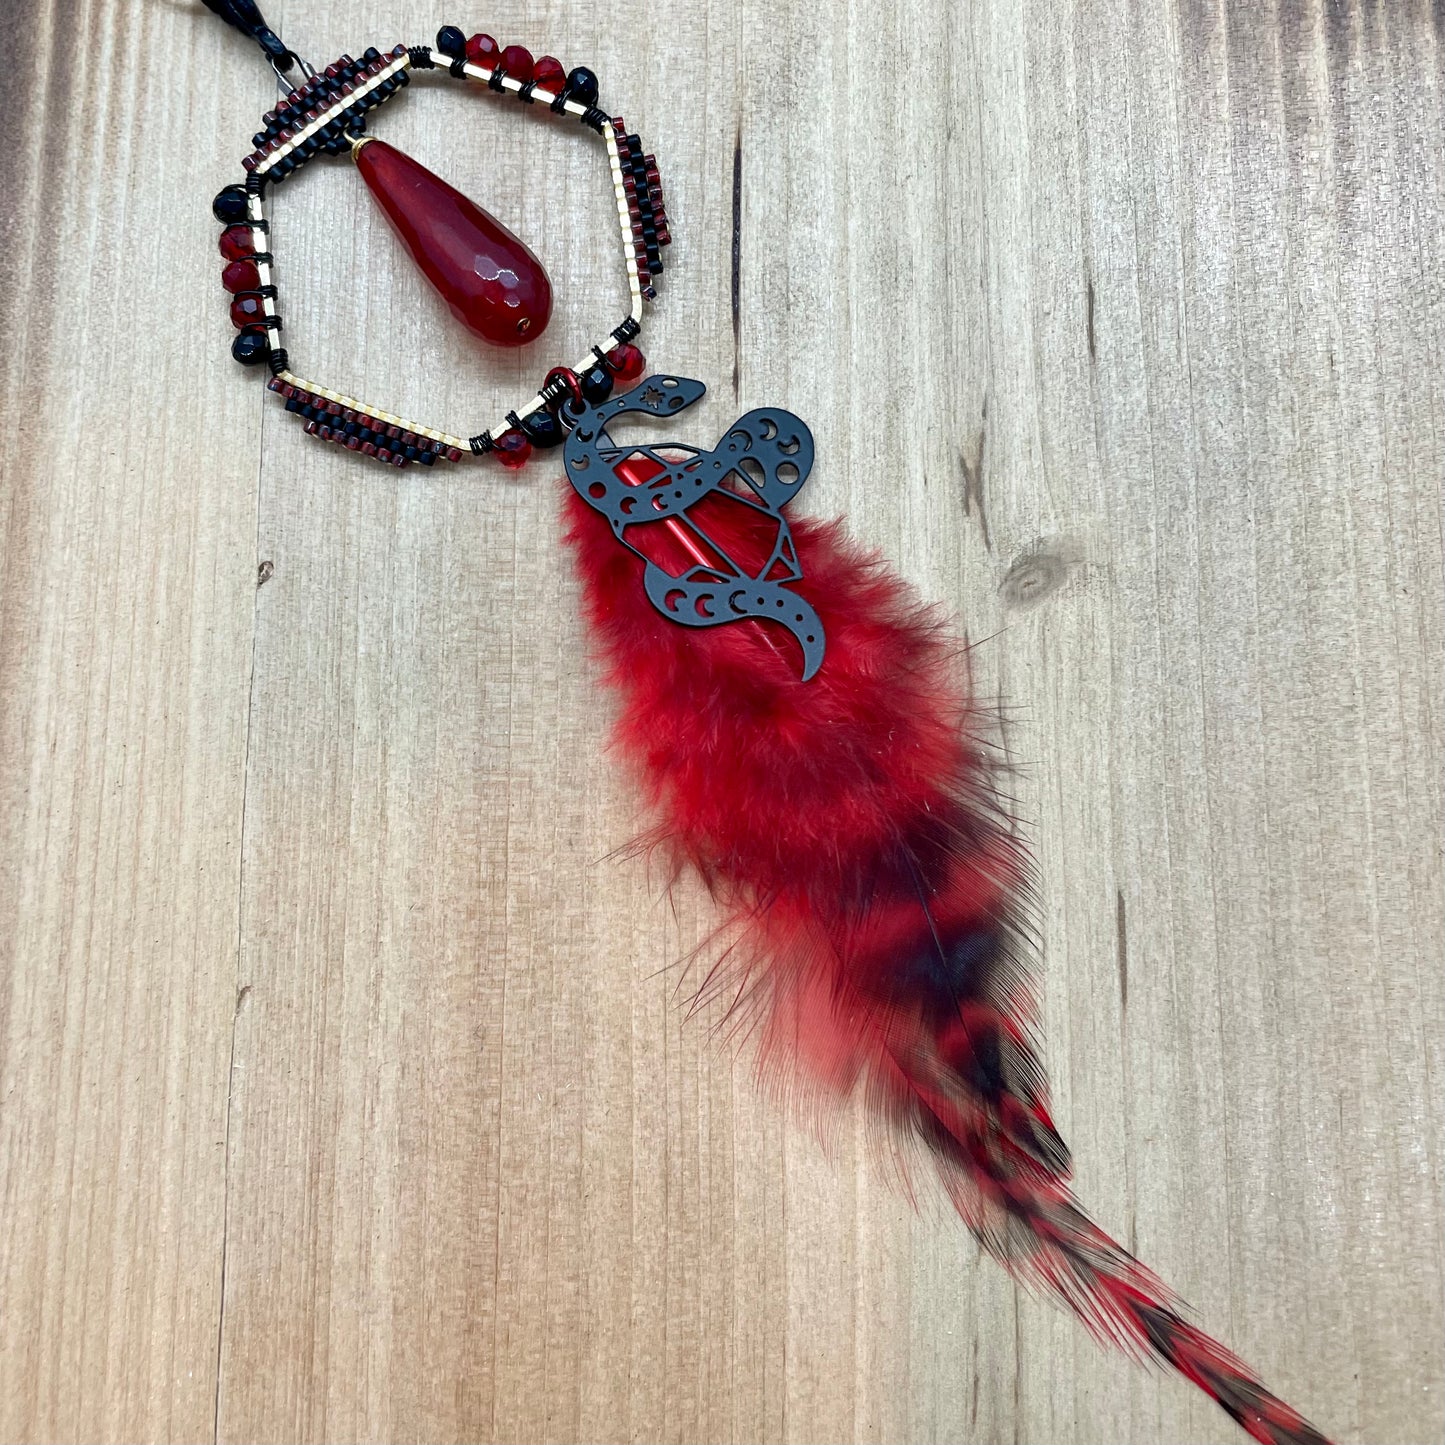 Red Feather Snake Charm Pendant necklace